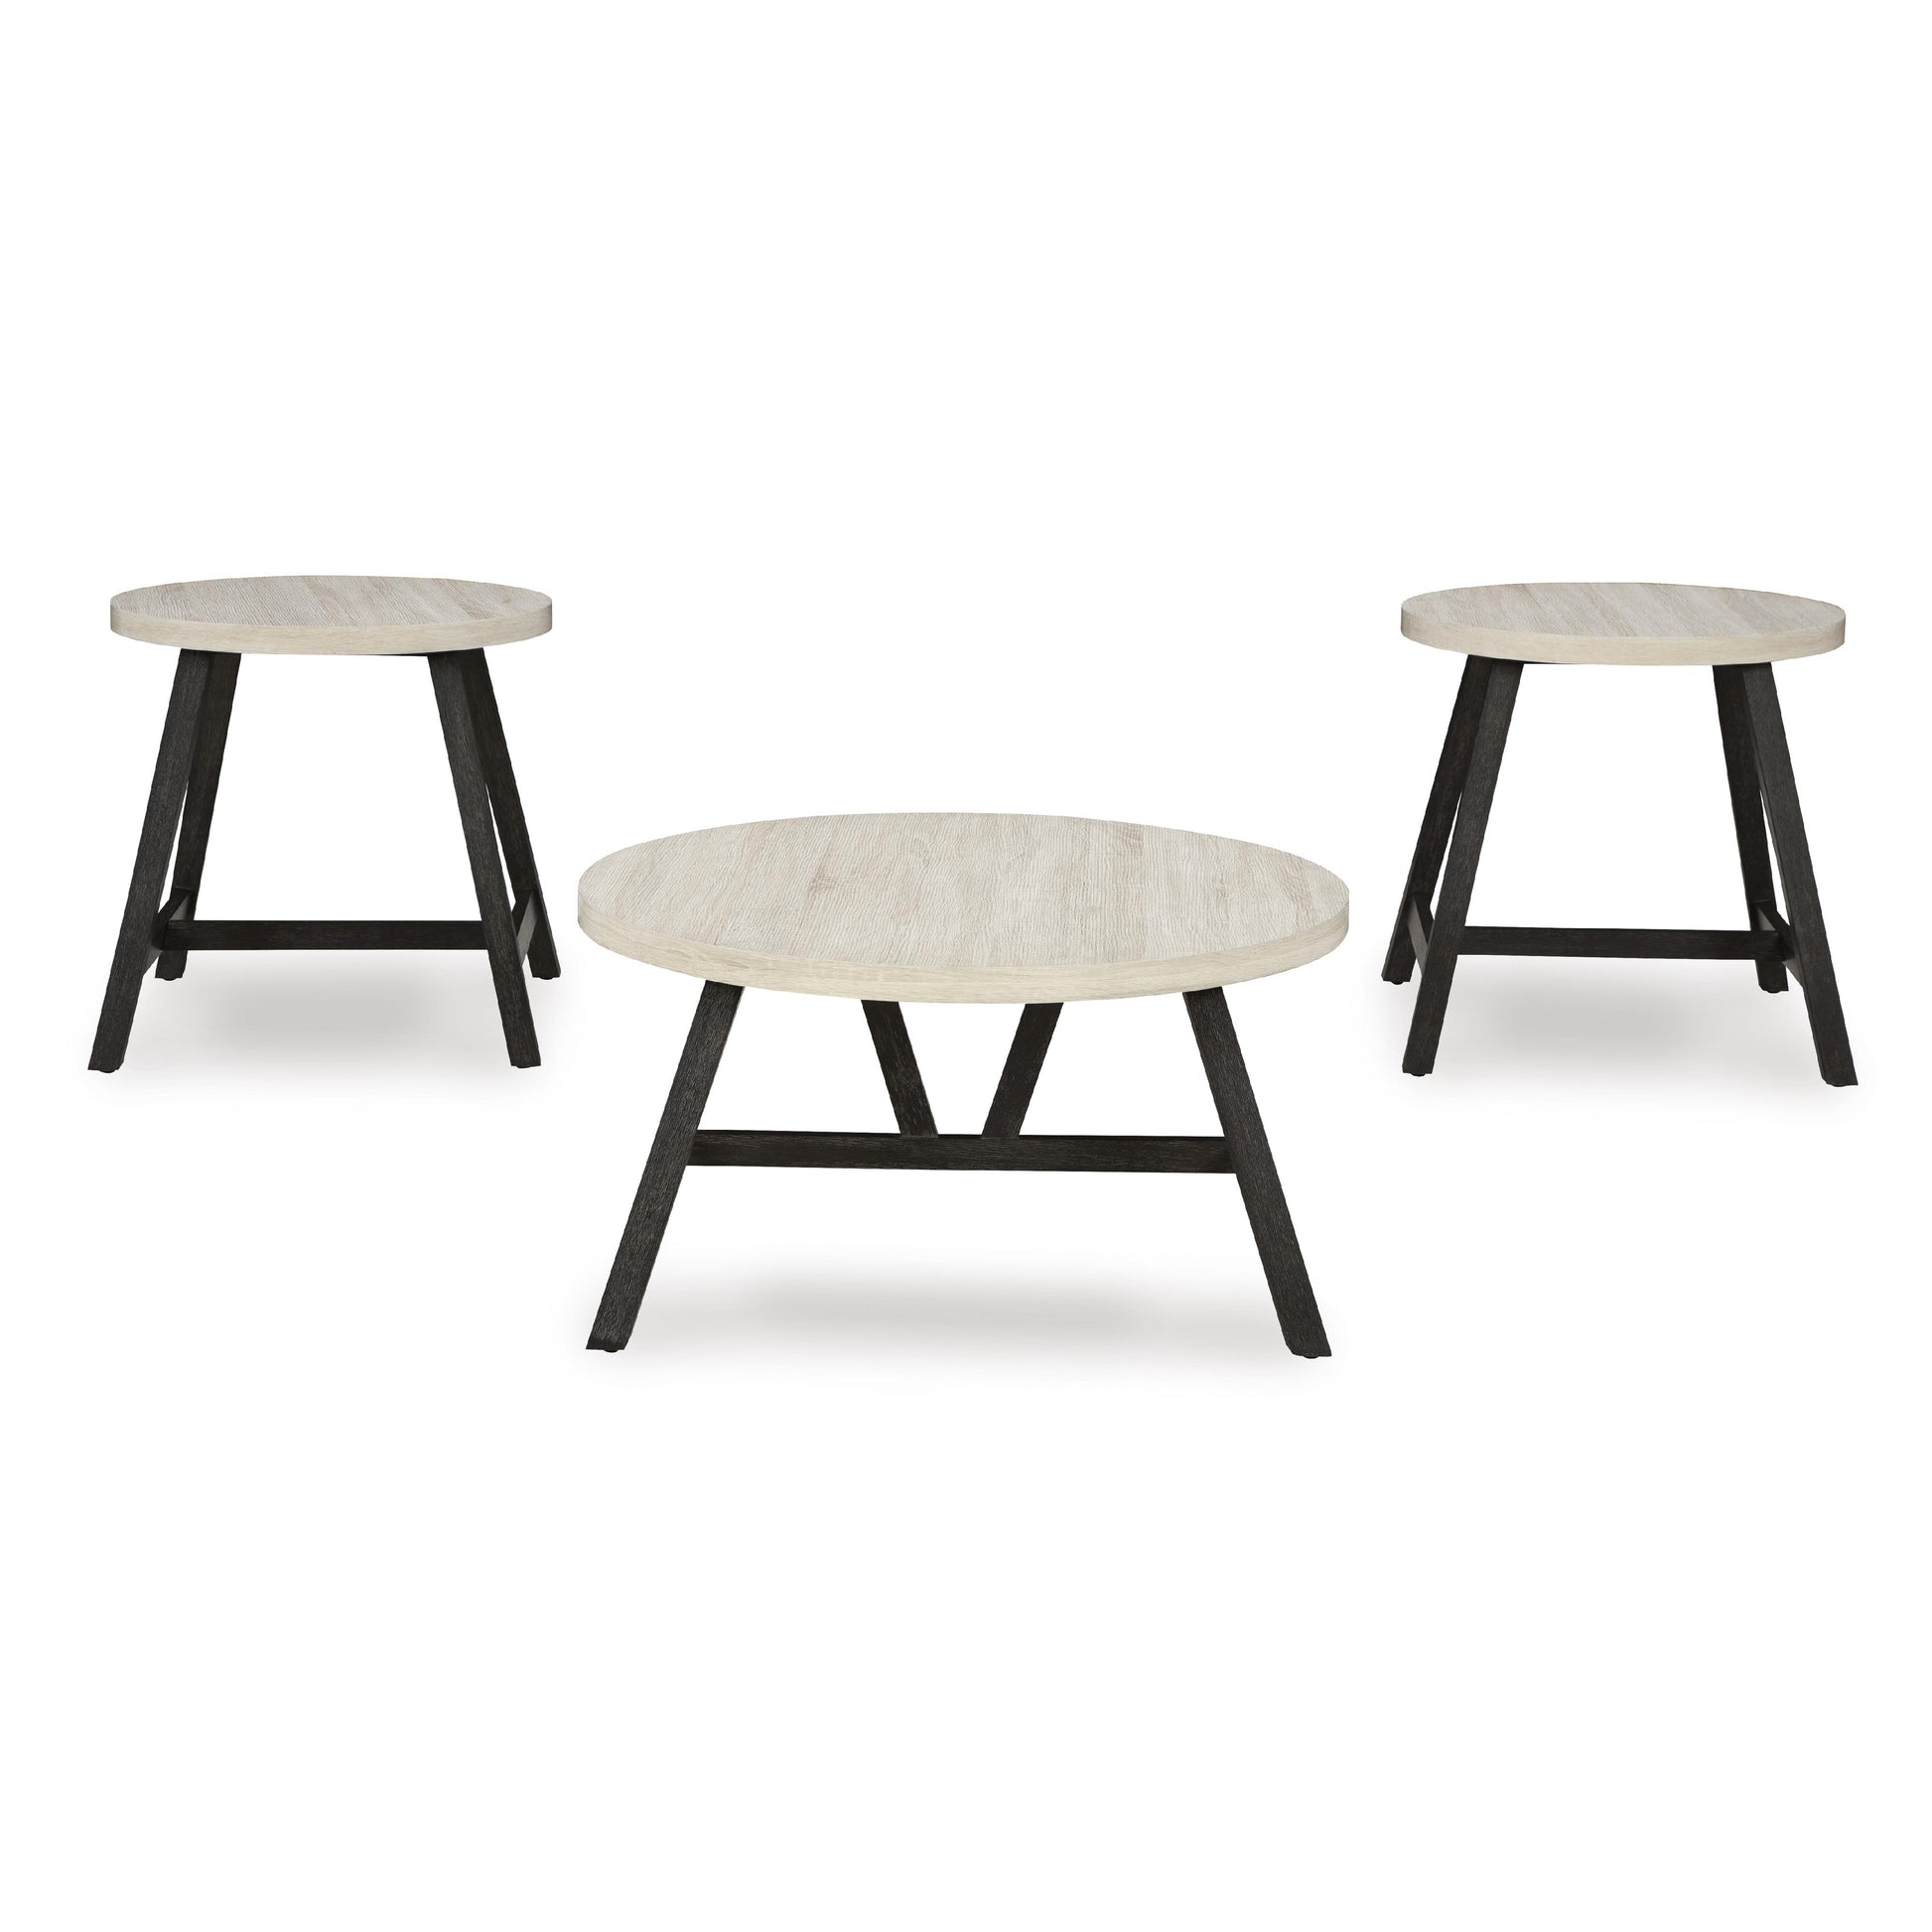 Signature Design by Ashley Fladona Occasional Table Set T243-13 IMAGE 2